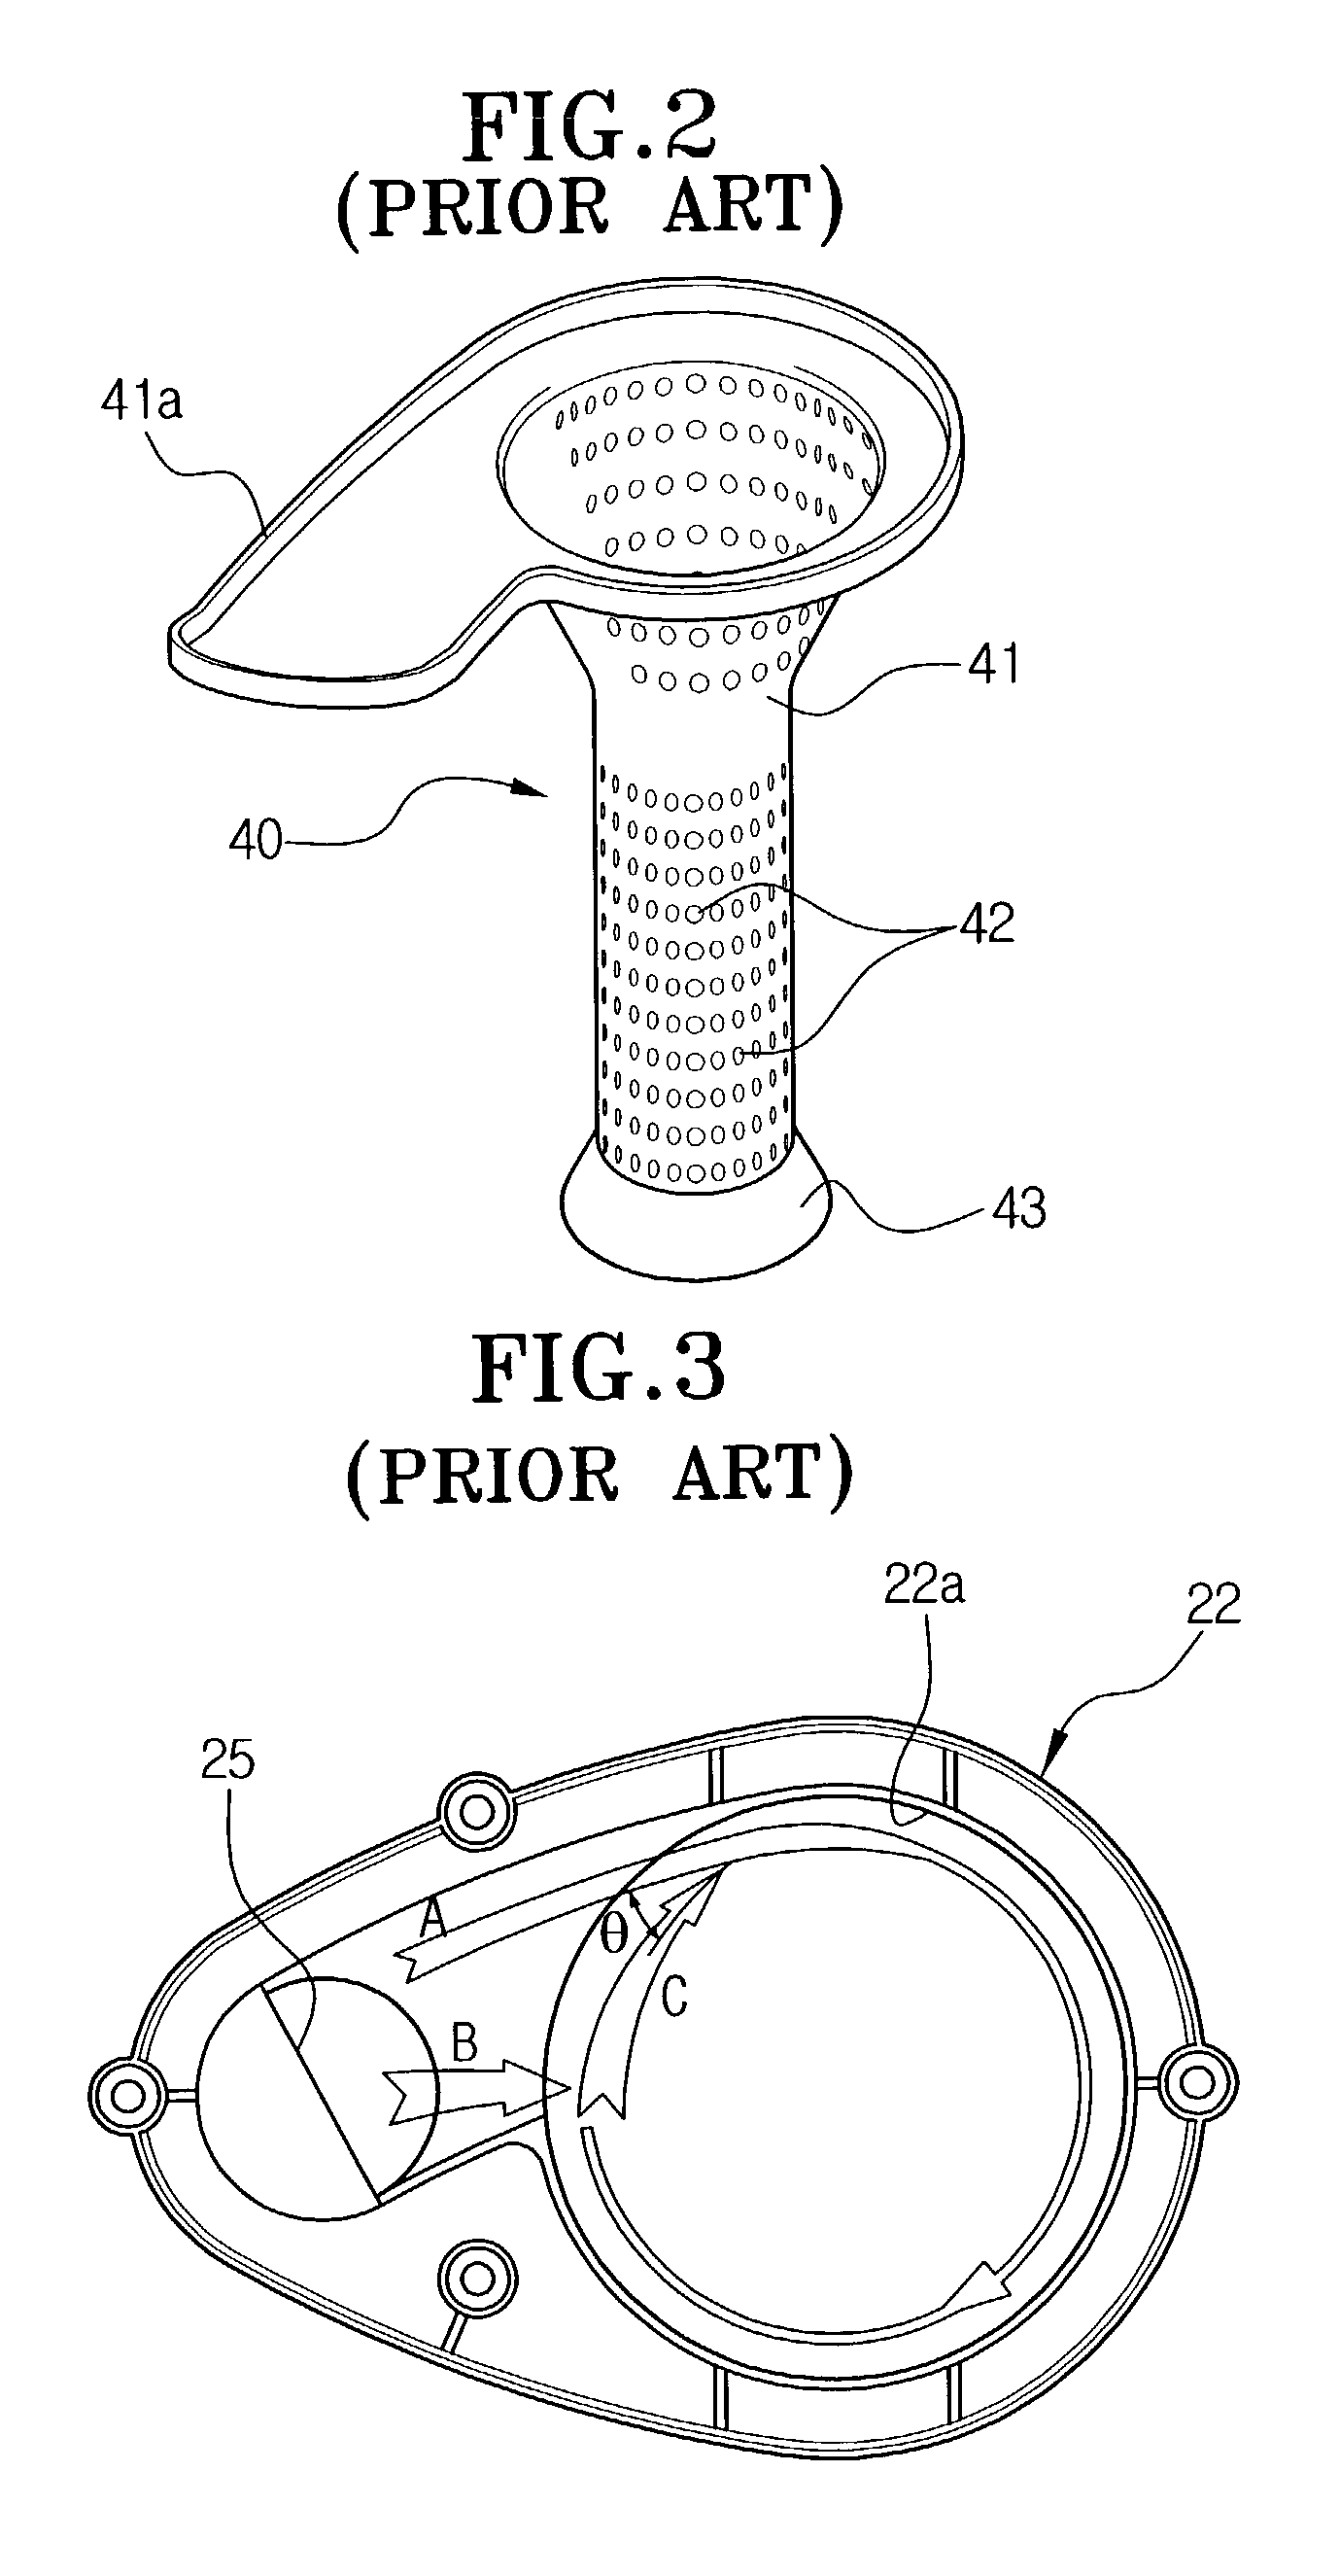 Cyclone-type dust-collecting apparatus for vacuum cleaner